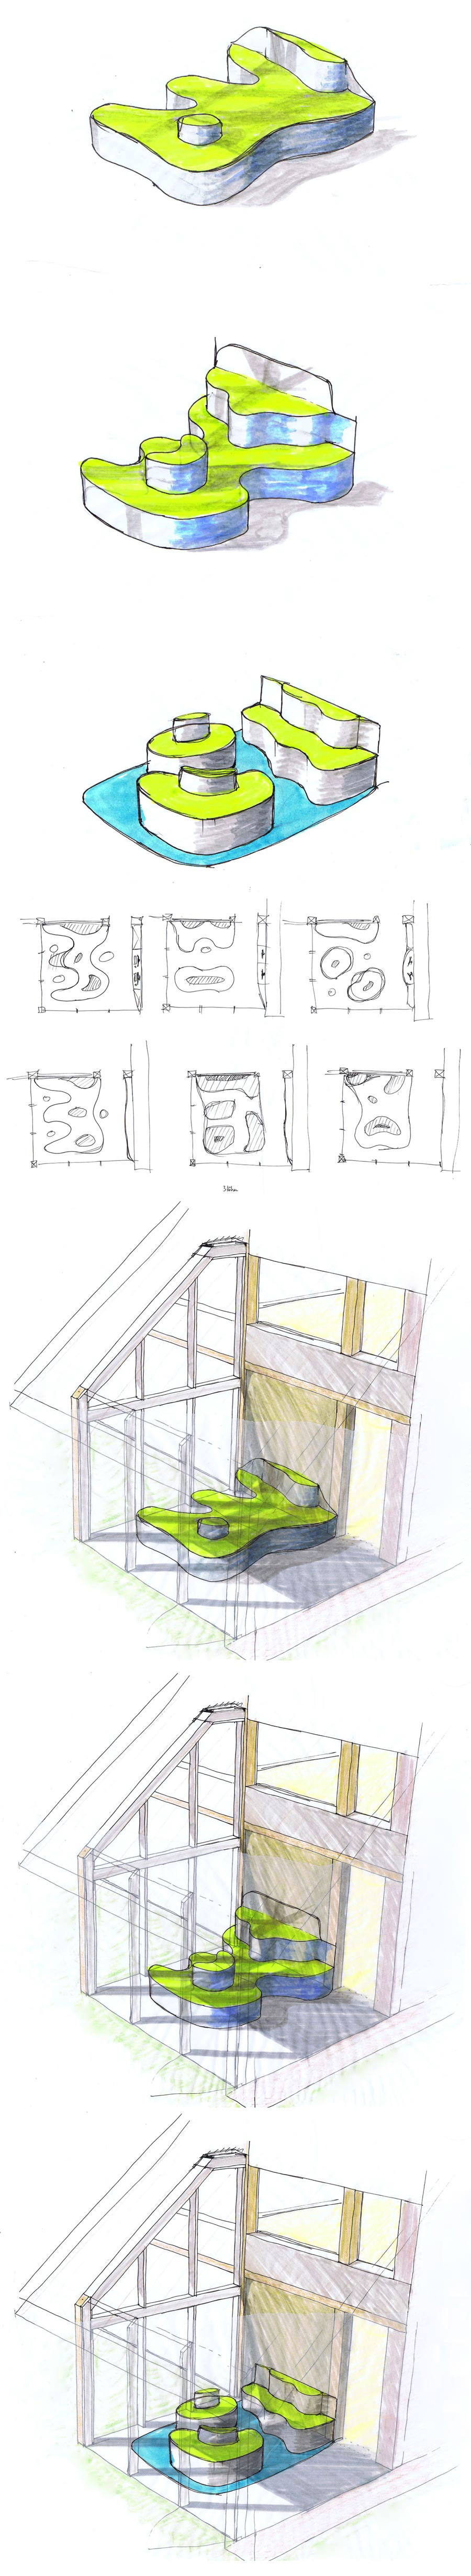 modernising barn library Puplic Space youth lounge furniture Interior design sketch sketching refurbish kids space public library cafe